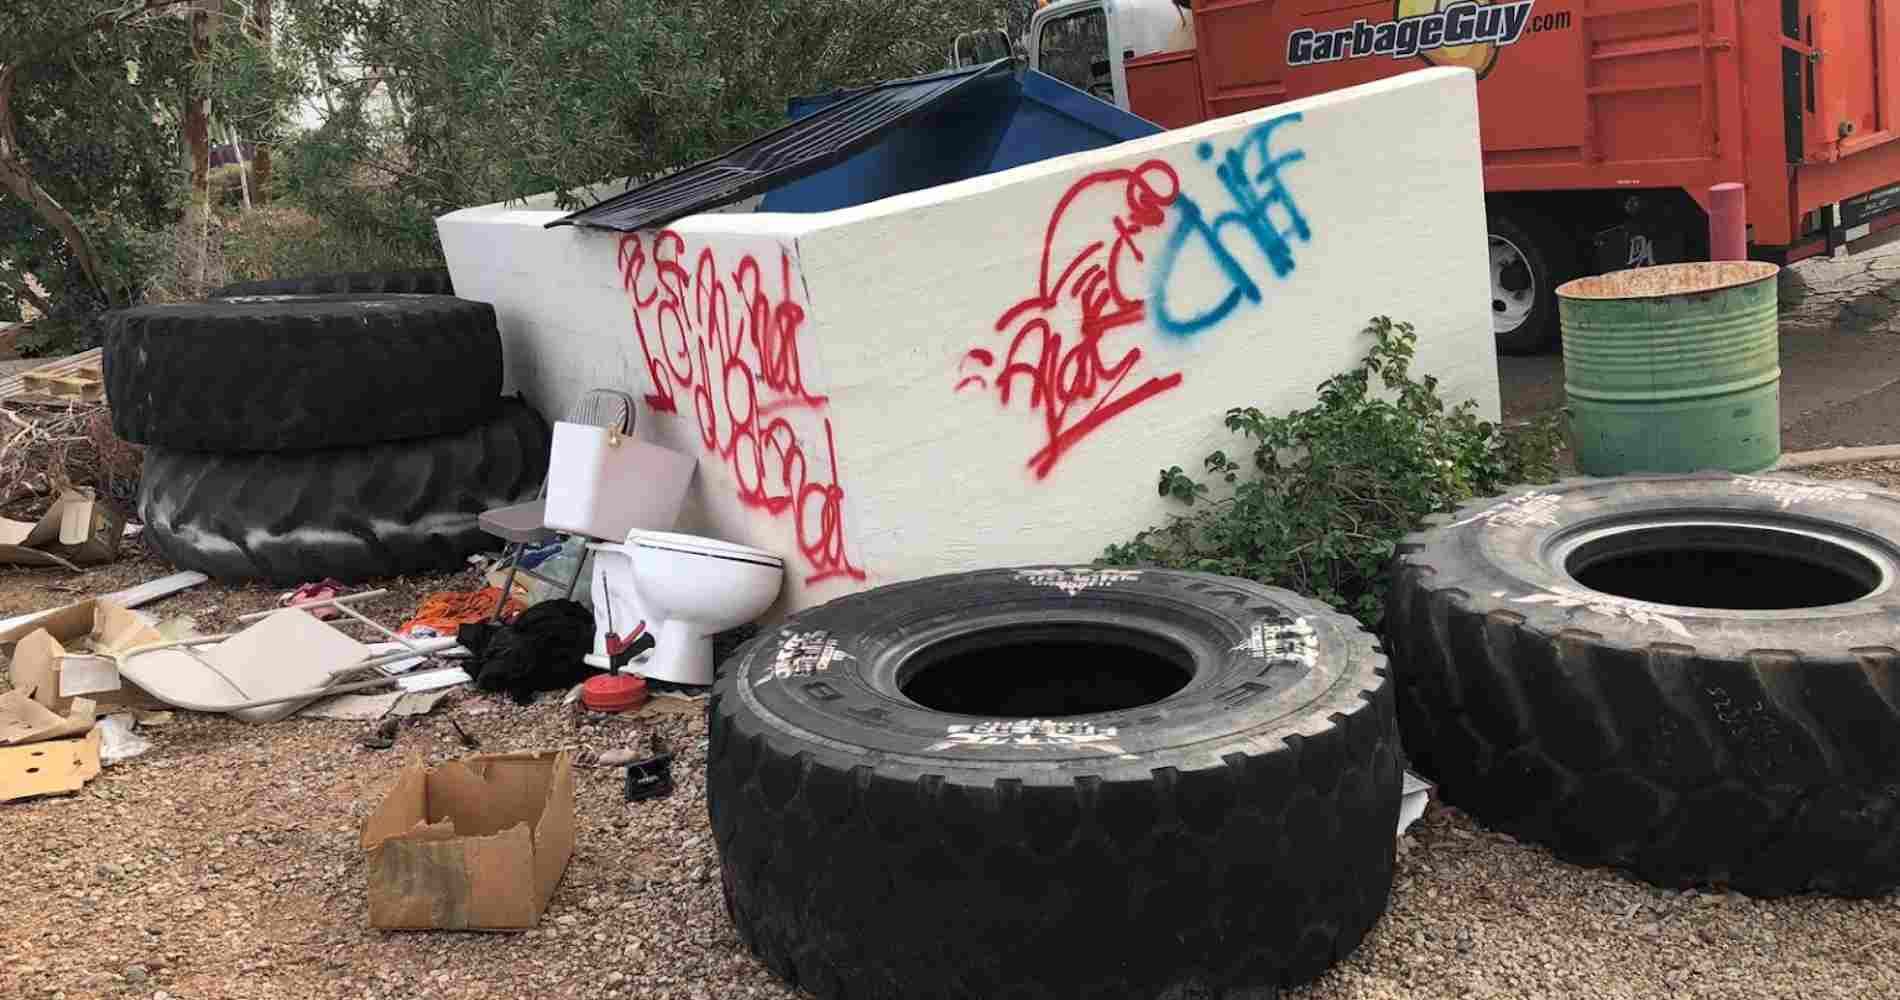 #1 for Tire Disposal in Scottsdale, AZ with Over 1200 5-Star Reviews!